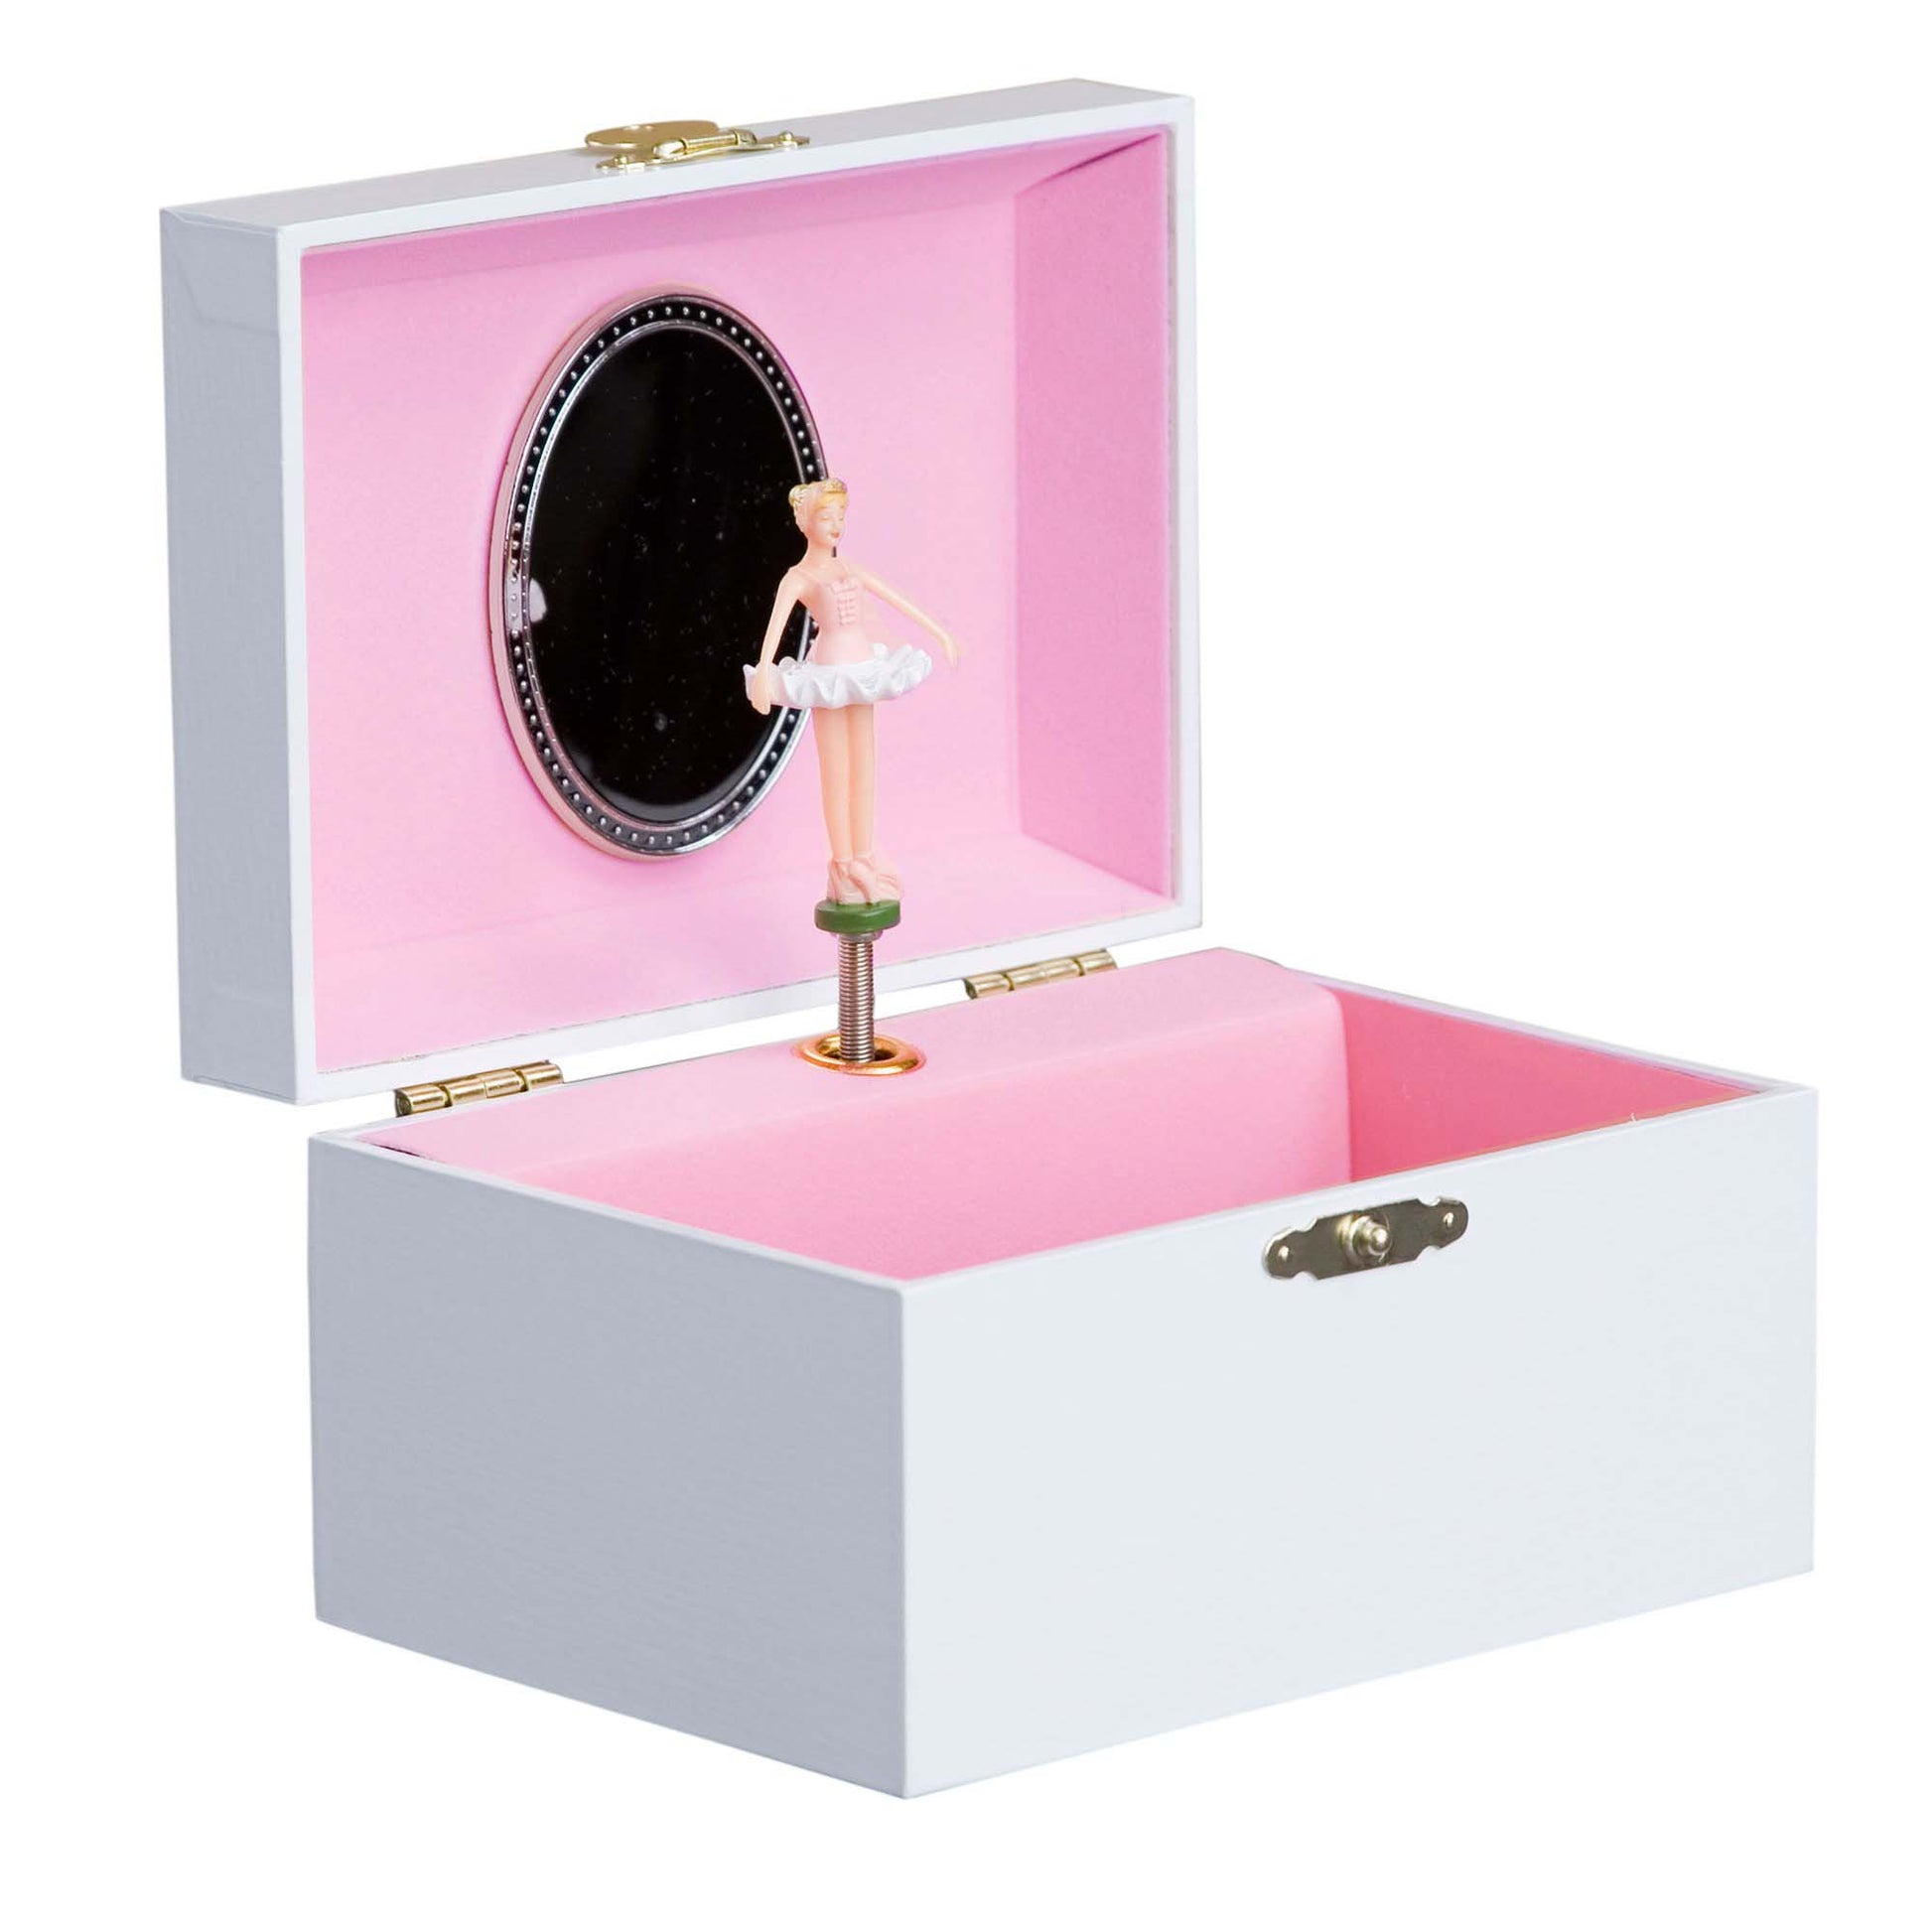 Personalized Ballerina Jewelry Box with Blush Floral Garland design